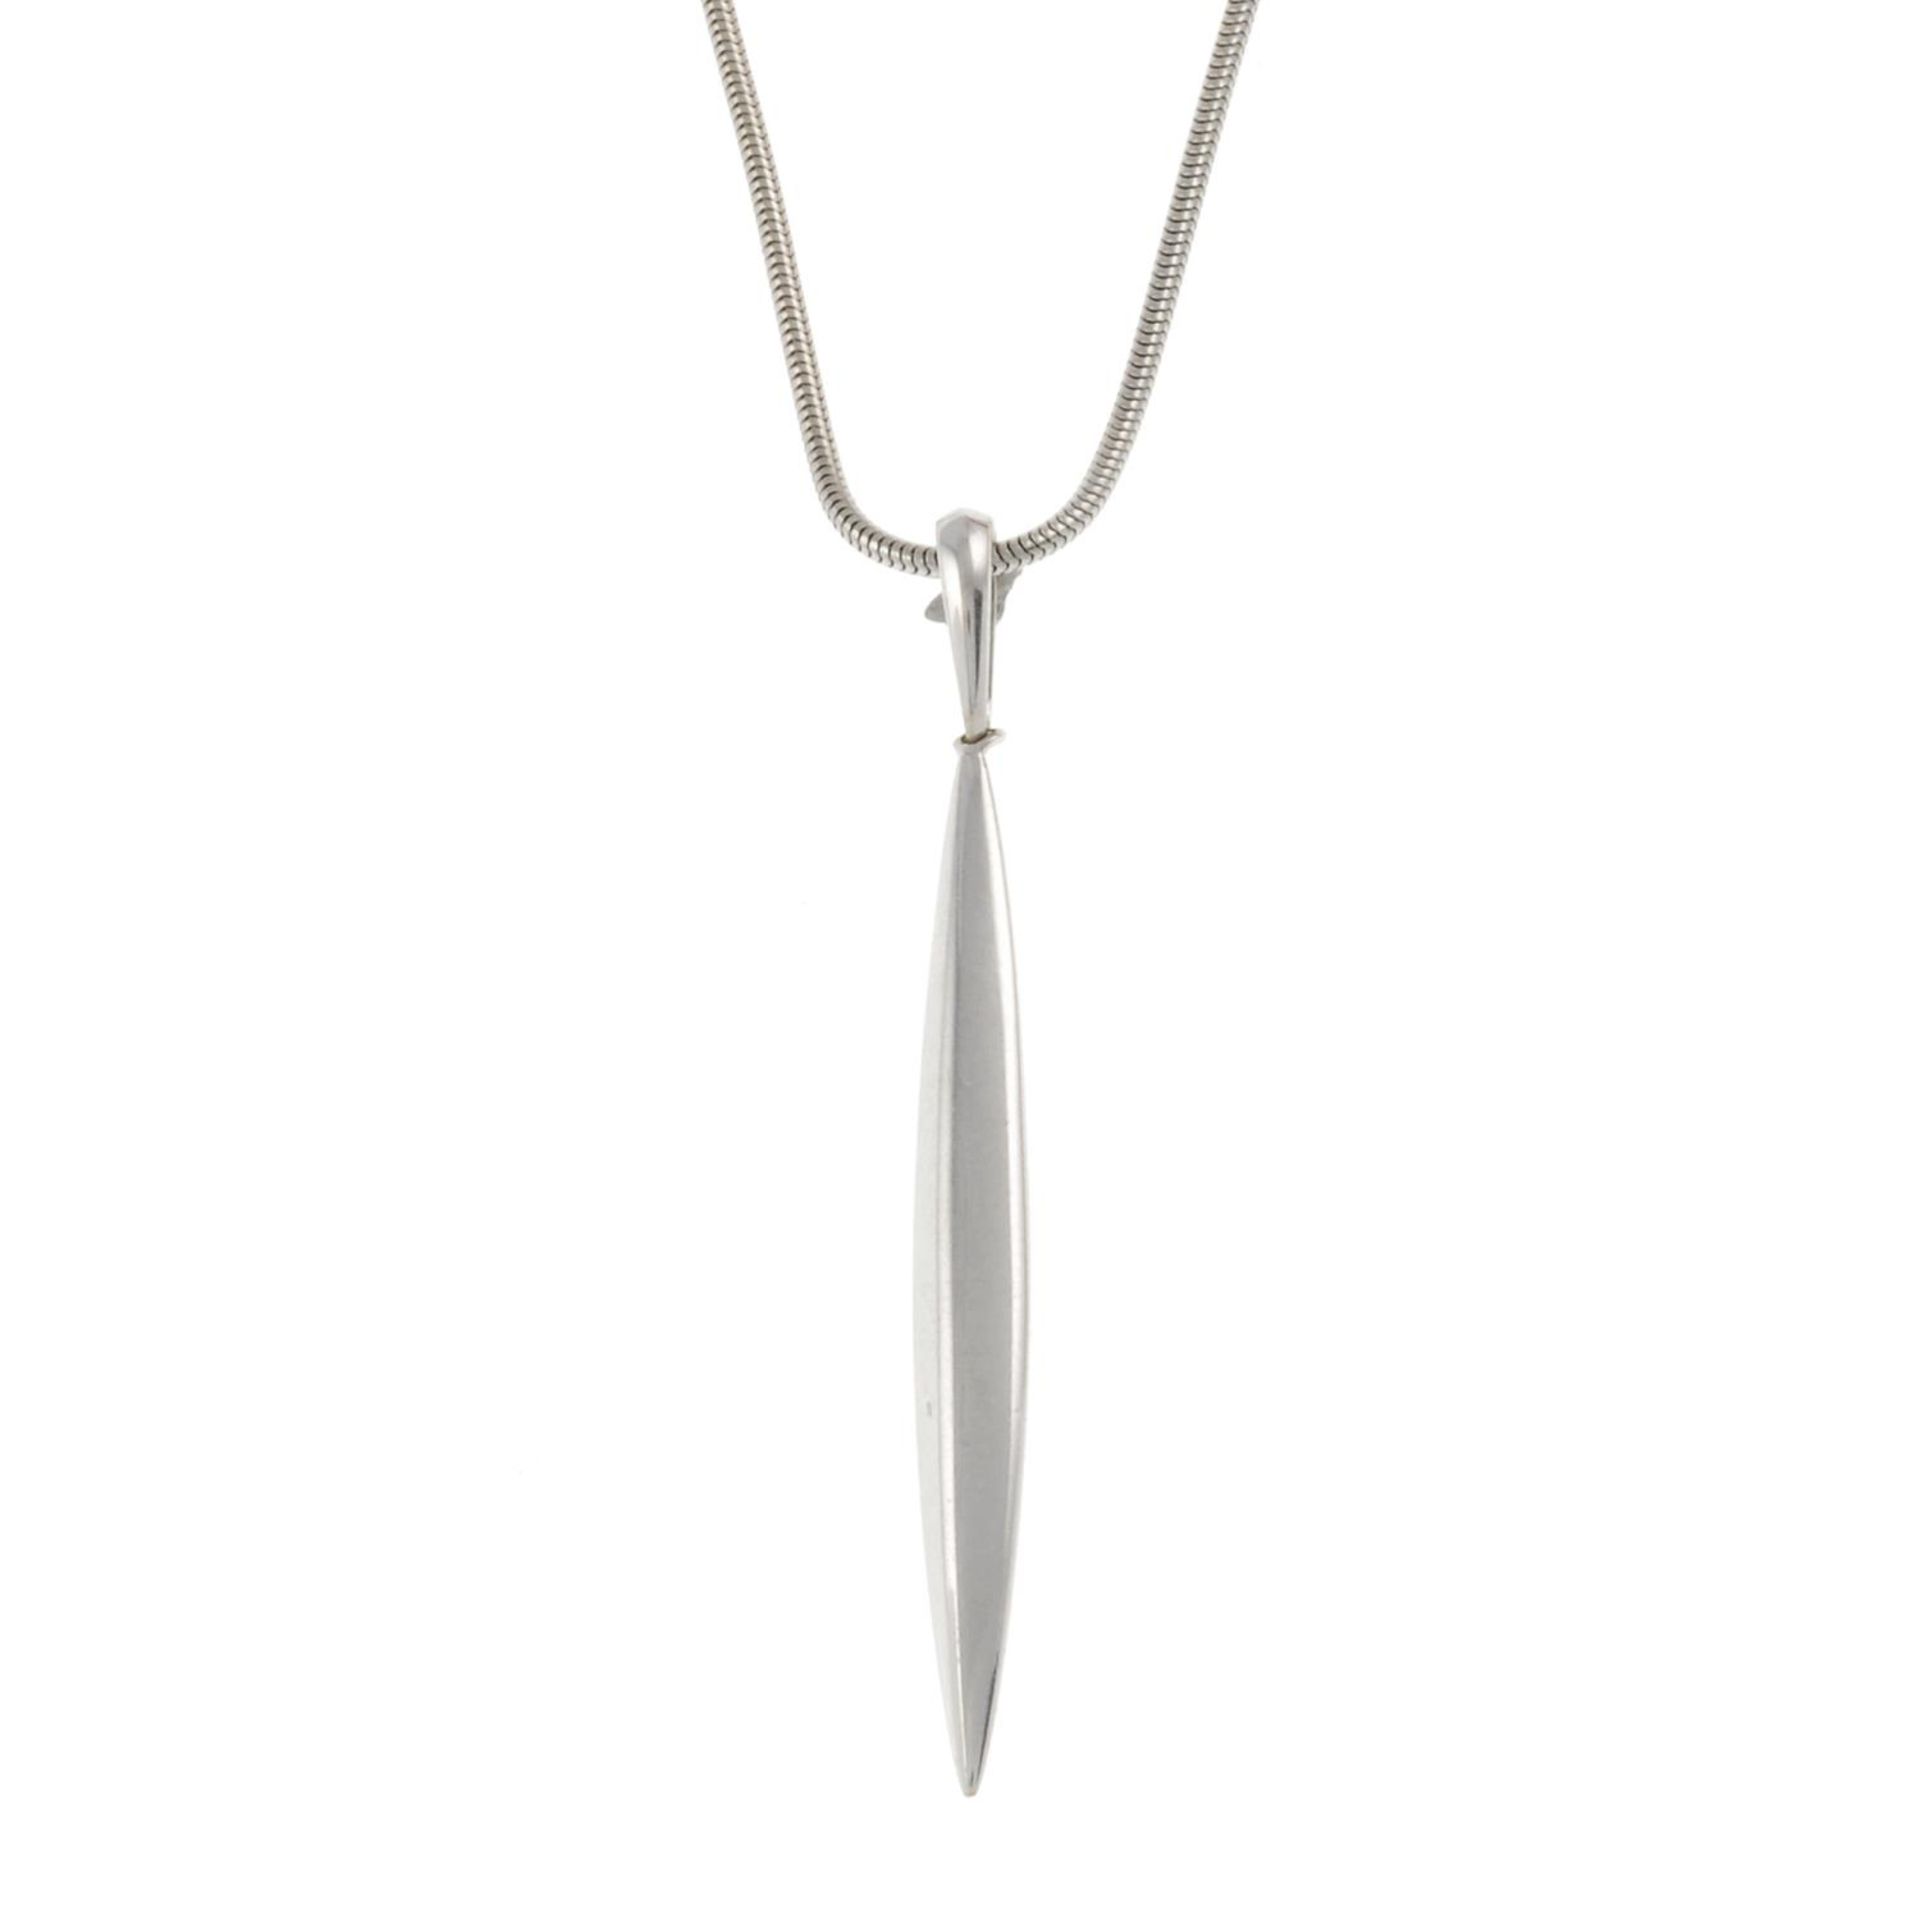 A pendant, suspended from a chain, by Tiffany & Co.Makers marks for Tiffany & Co.